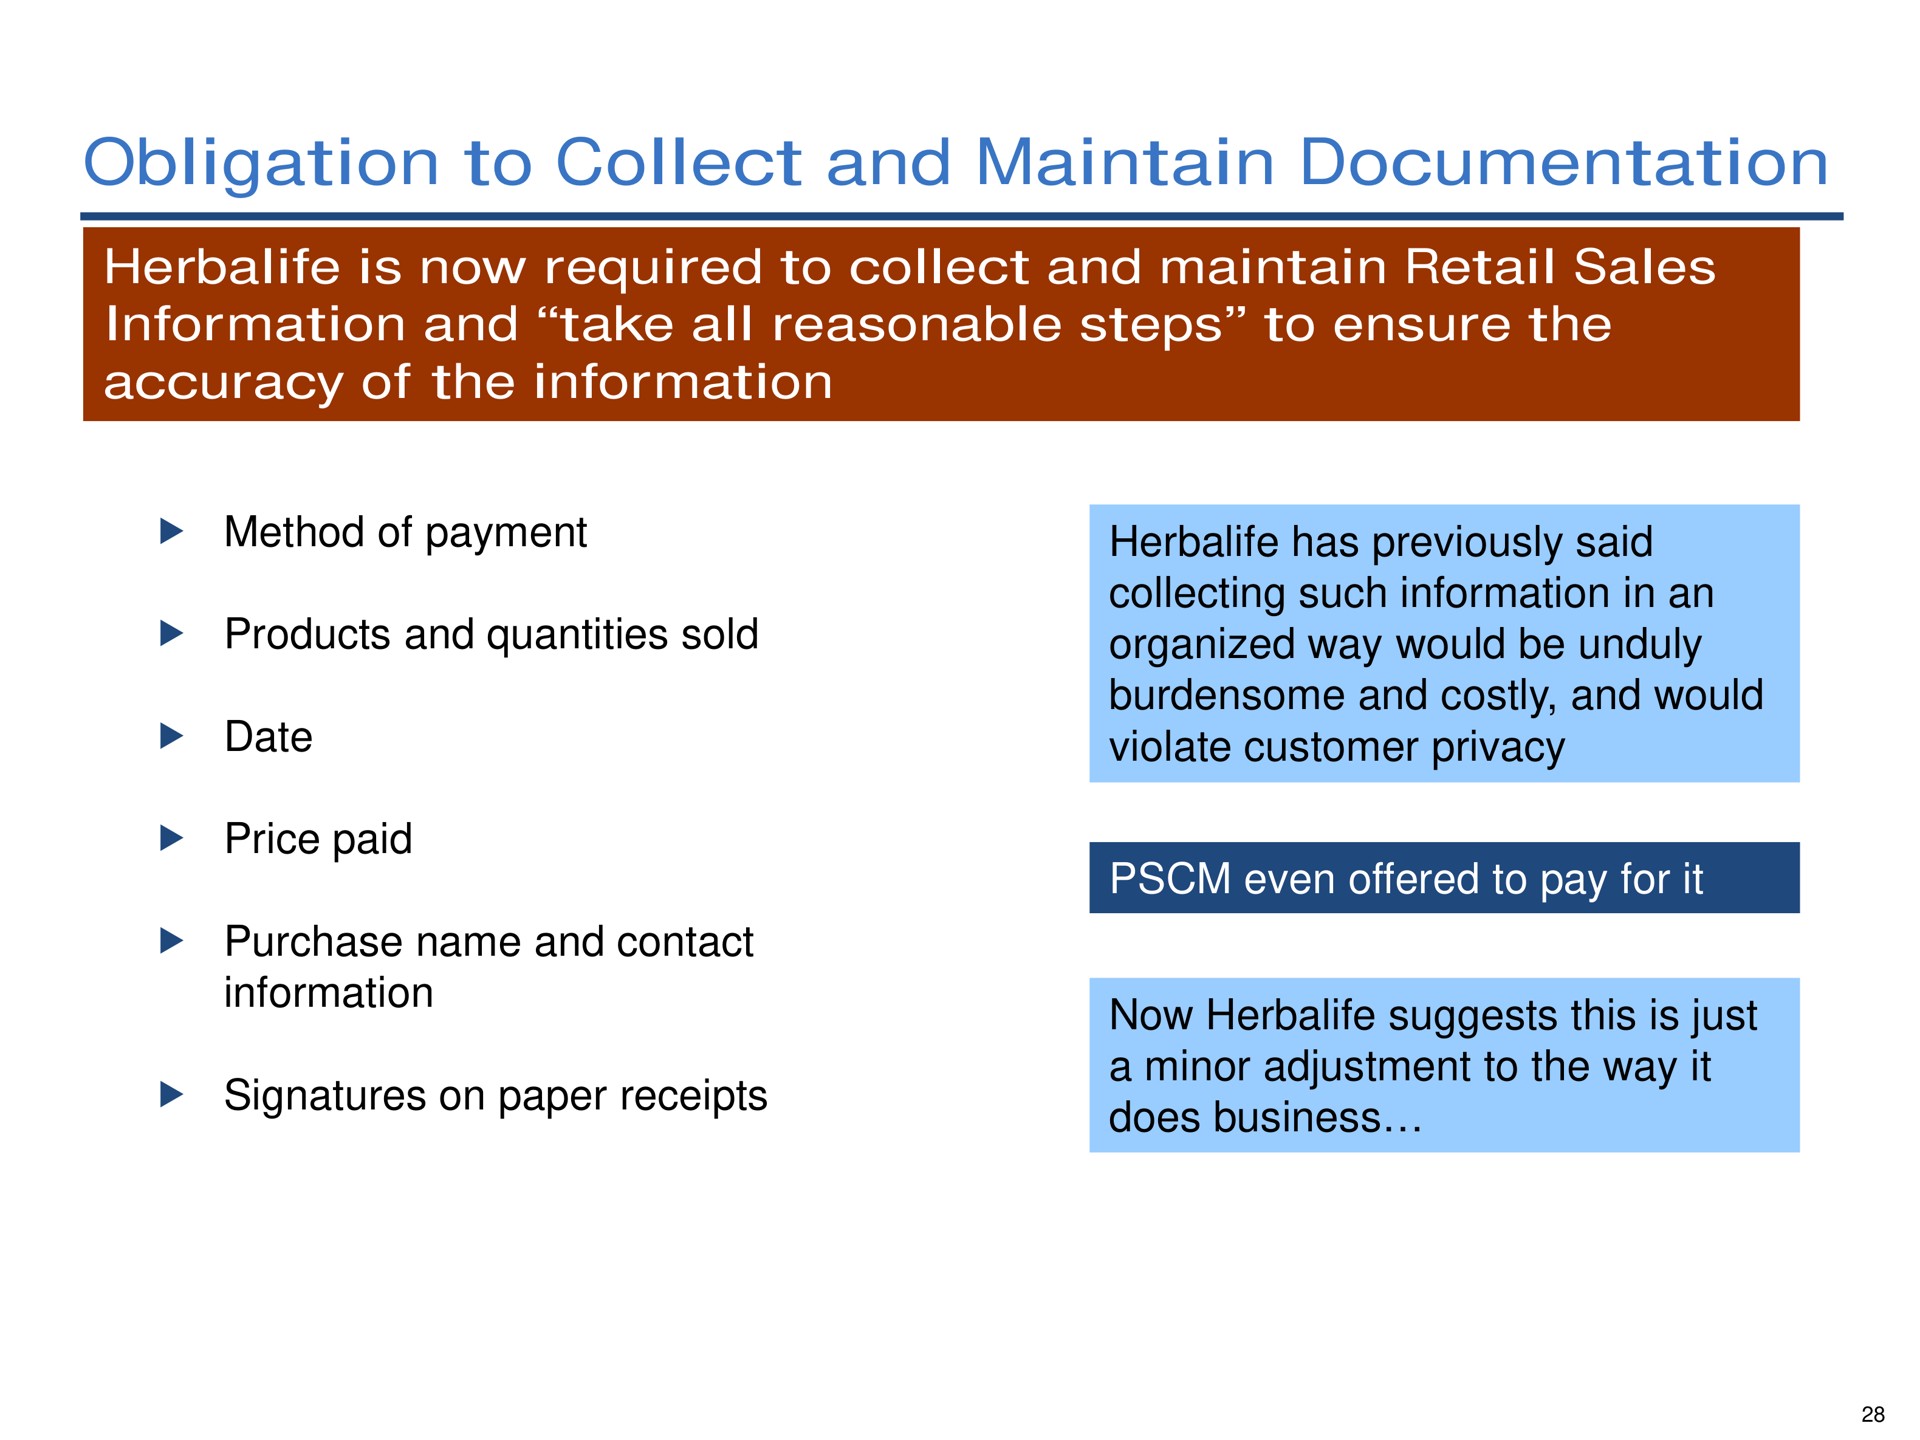 obligation to collect and maintain documentation date violate customer privacy | Pershing Square